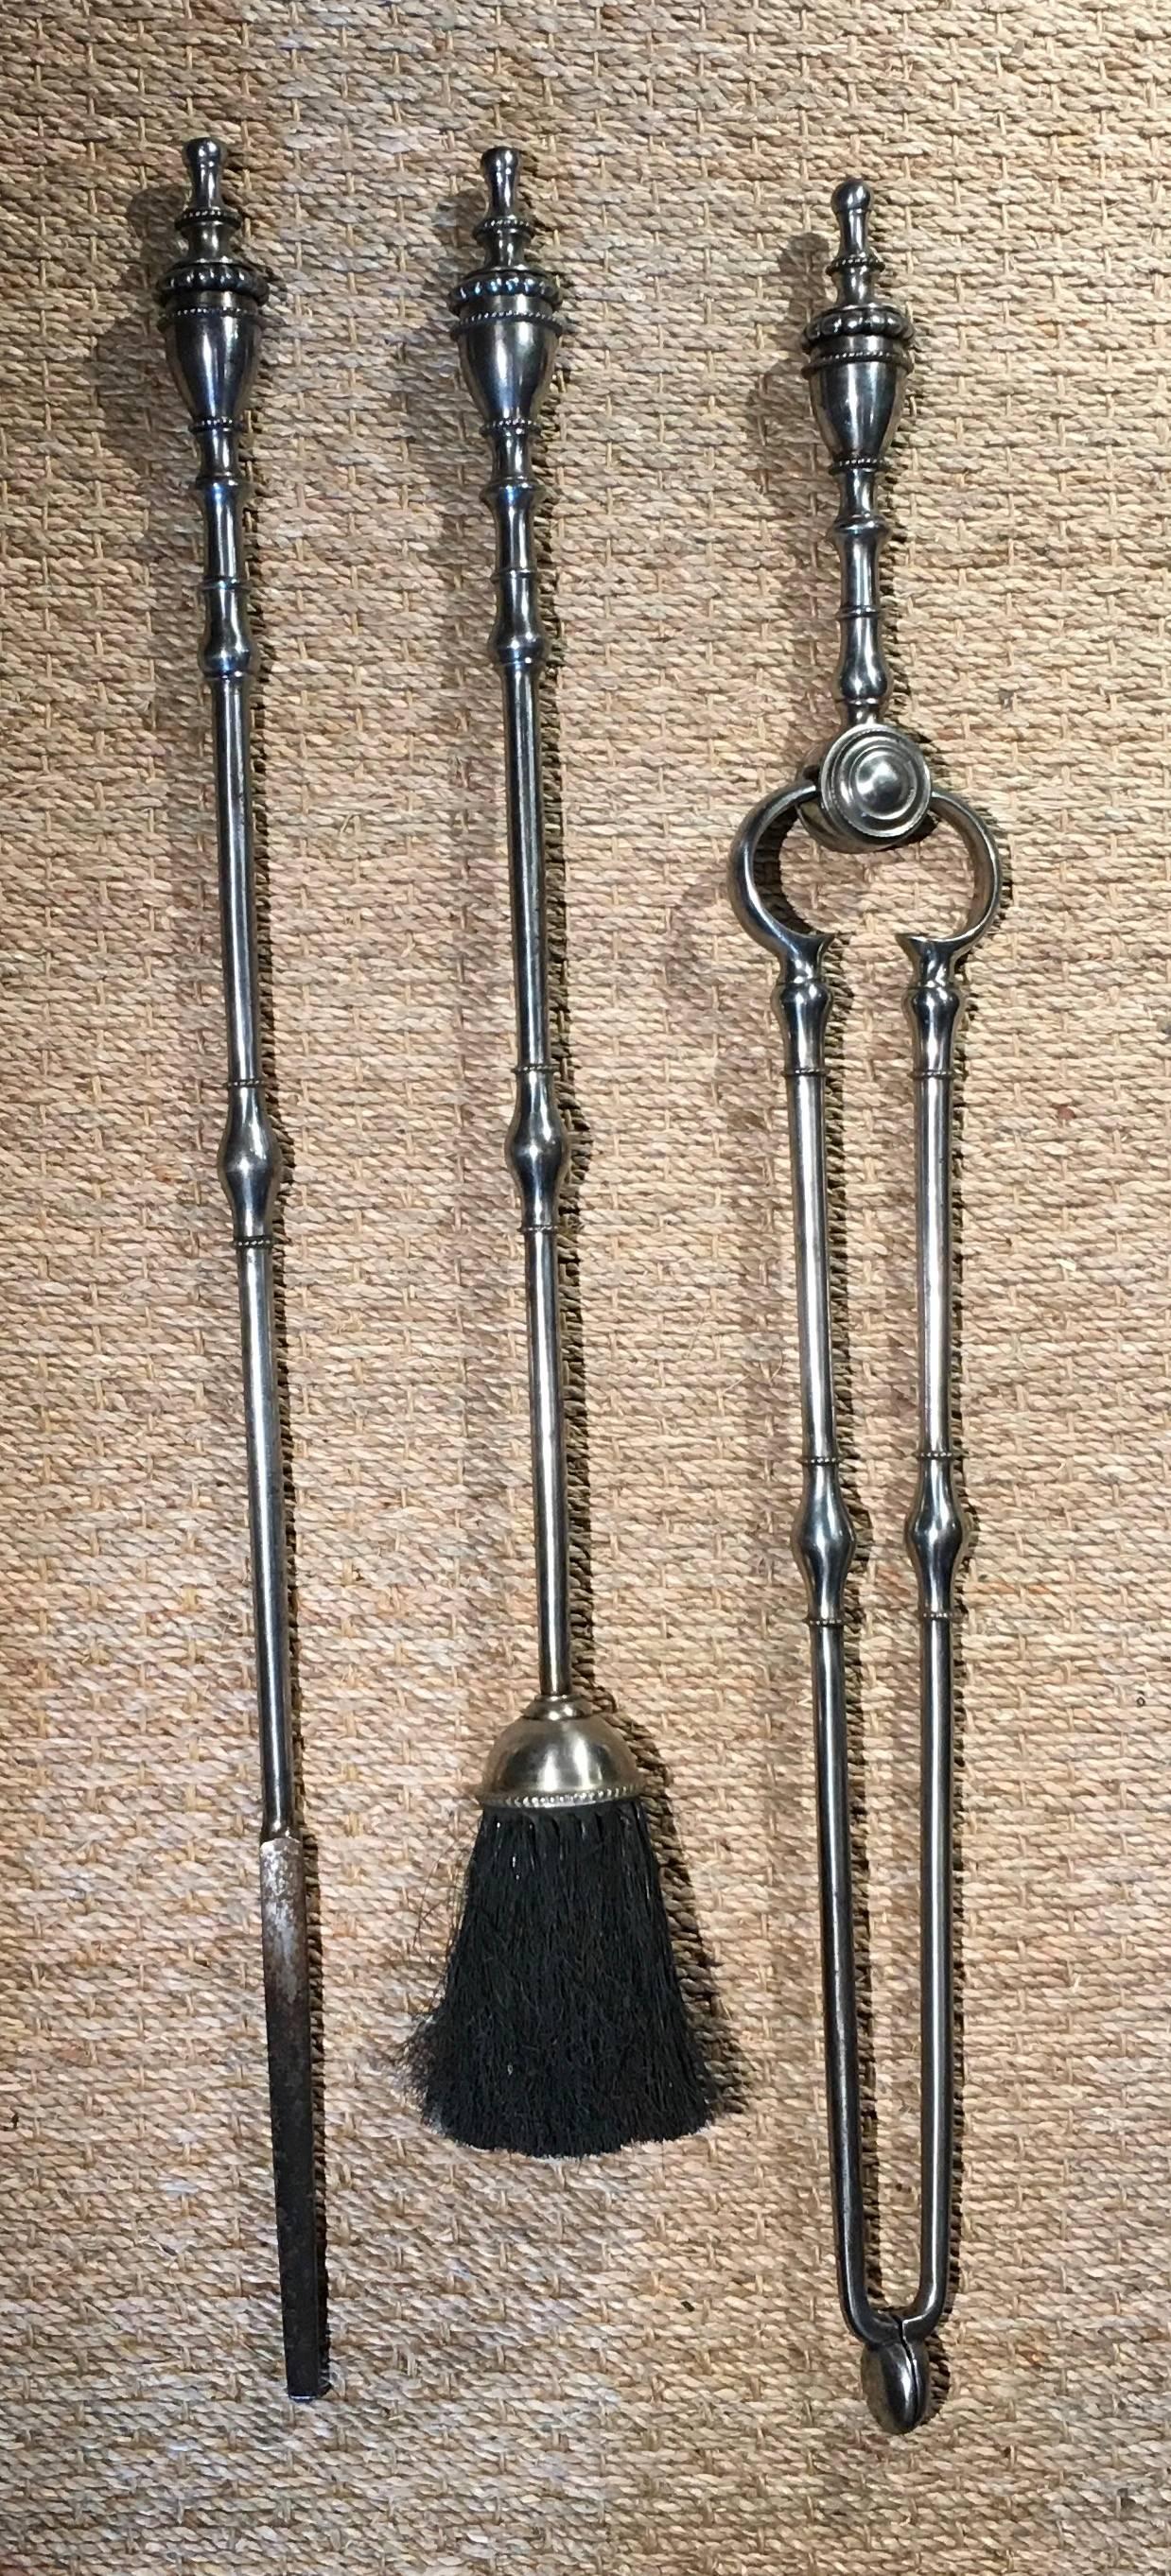 Very fine set of late 19th century English steel fire tools comprising a poker, tongs and hearth brush having bold urn handles, the shafts with ringed bulbous collar and the whole in good polished gun metal surface.